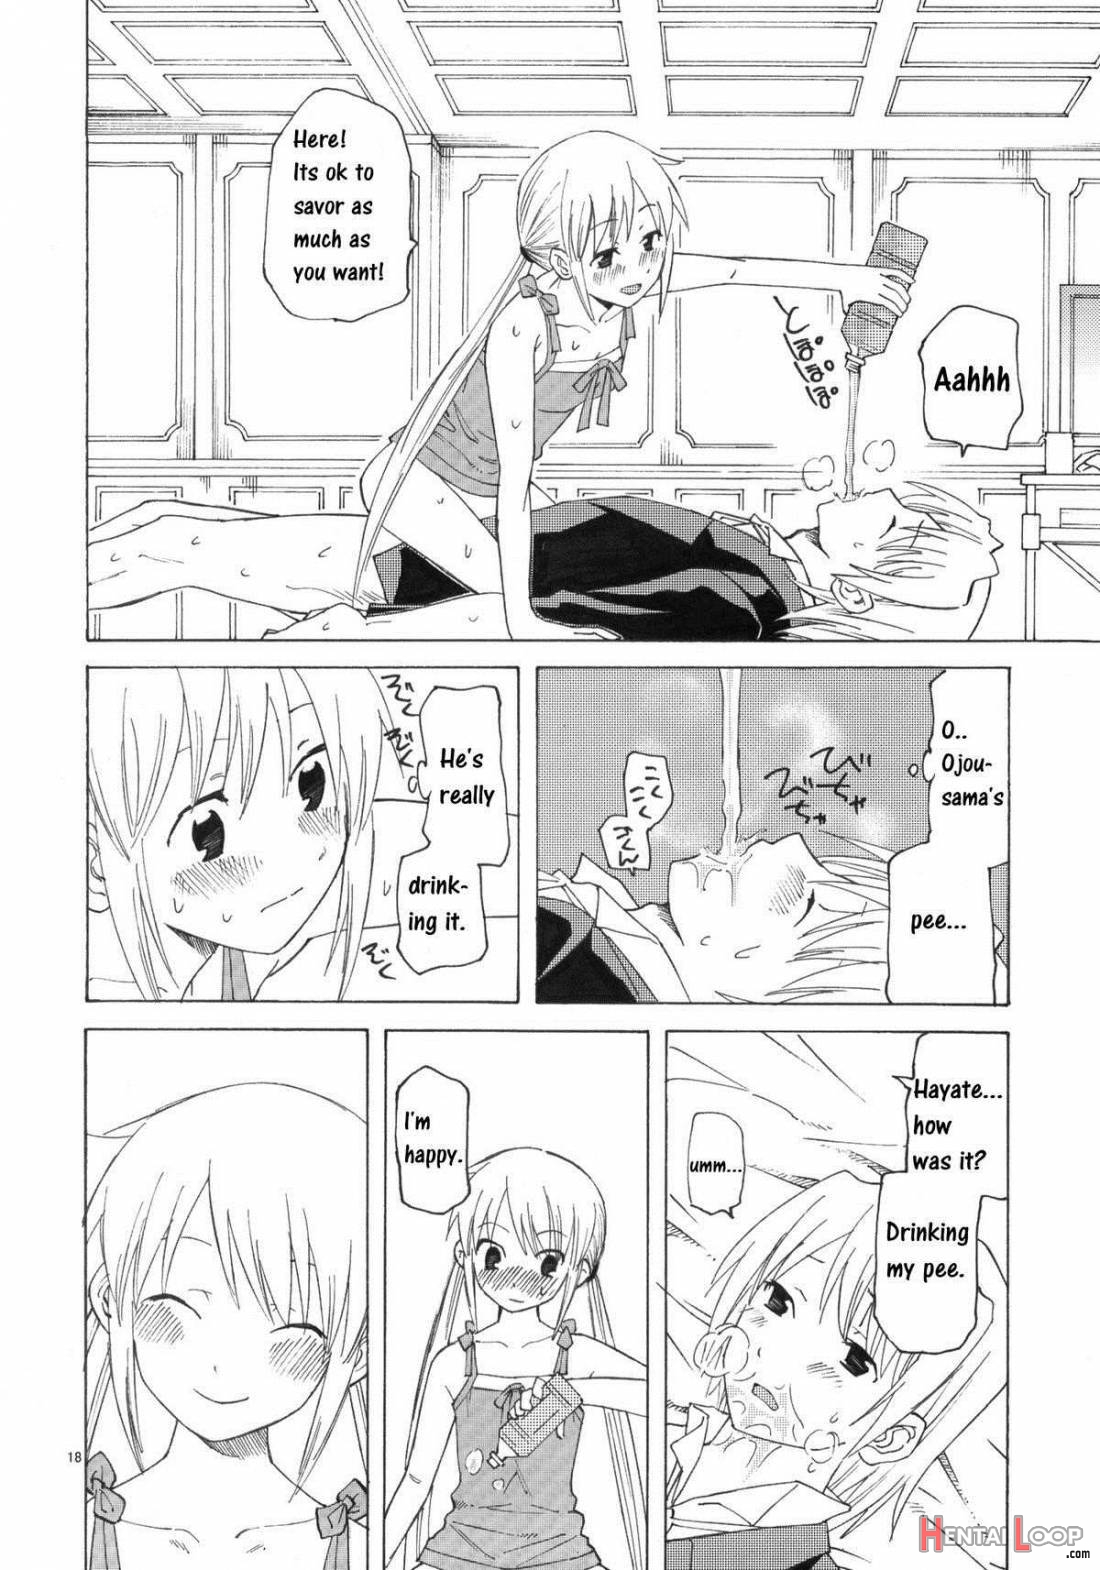 The Shut-In Ojousama's Stickiness page 16